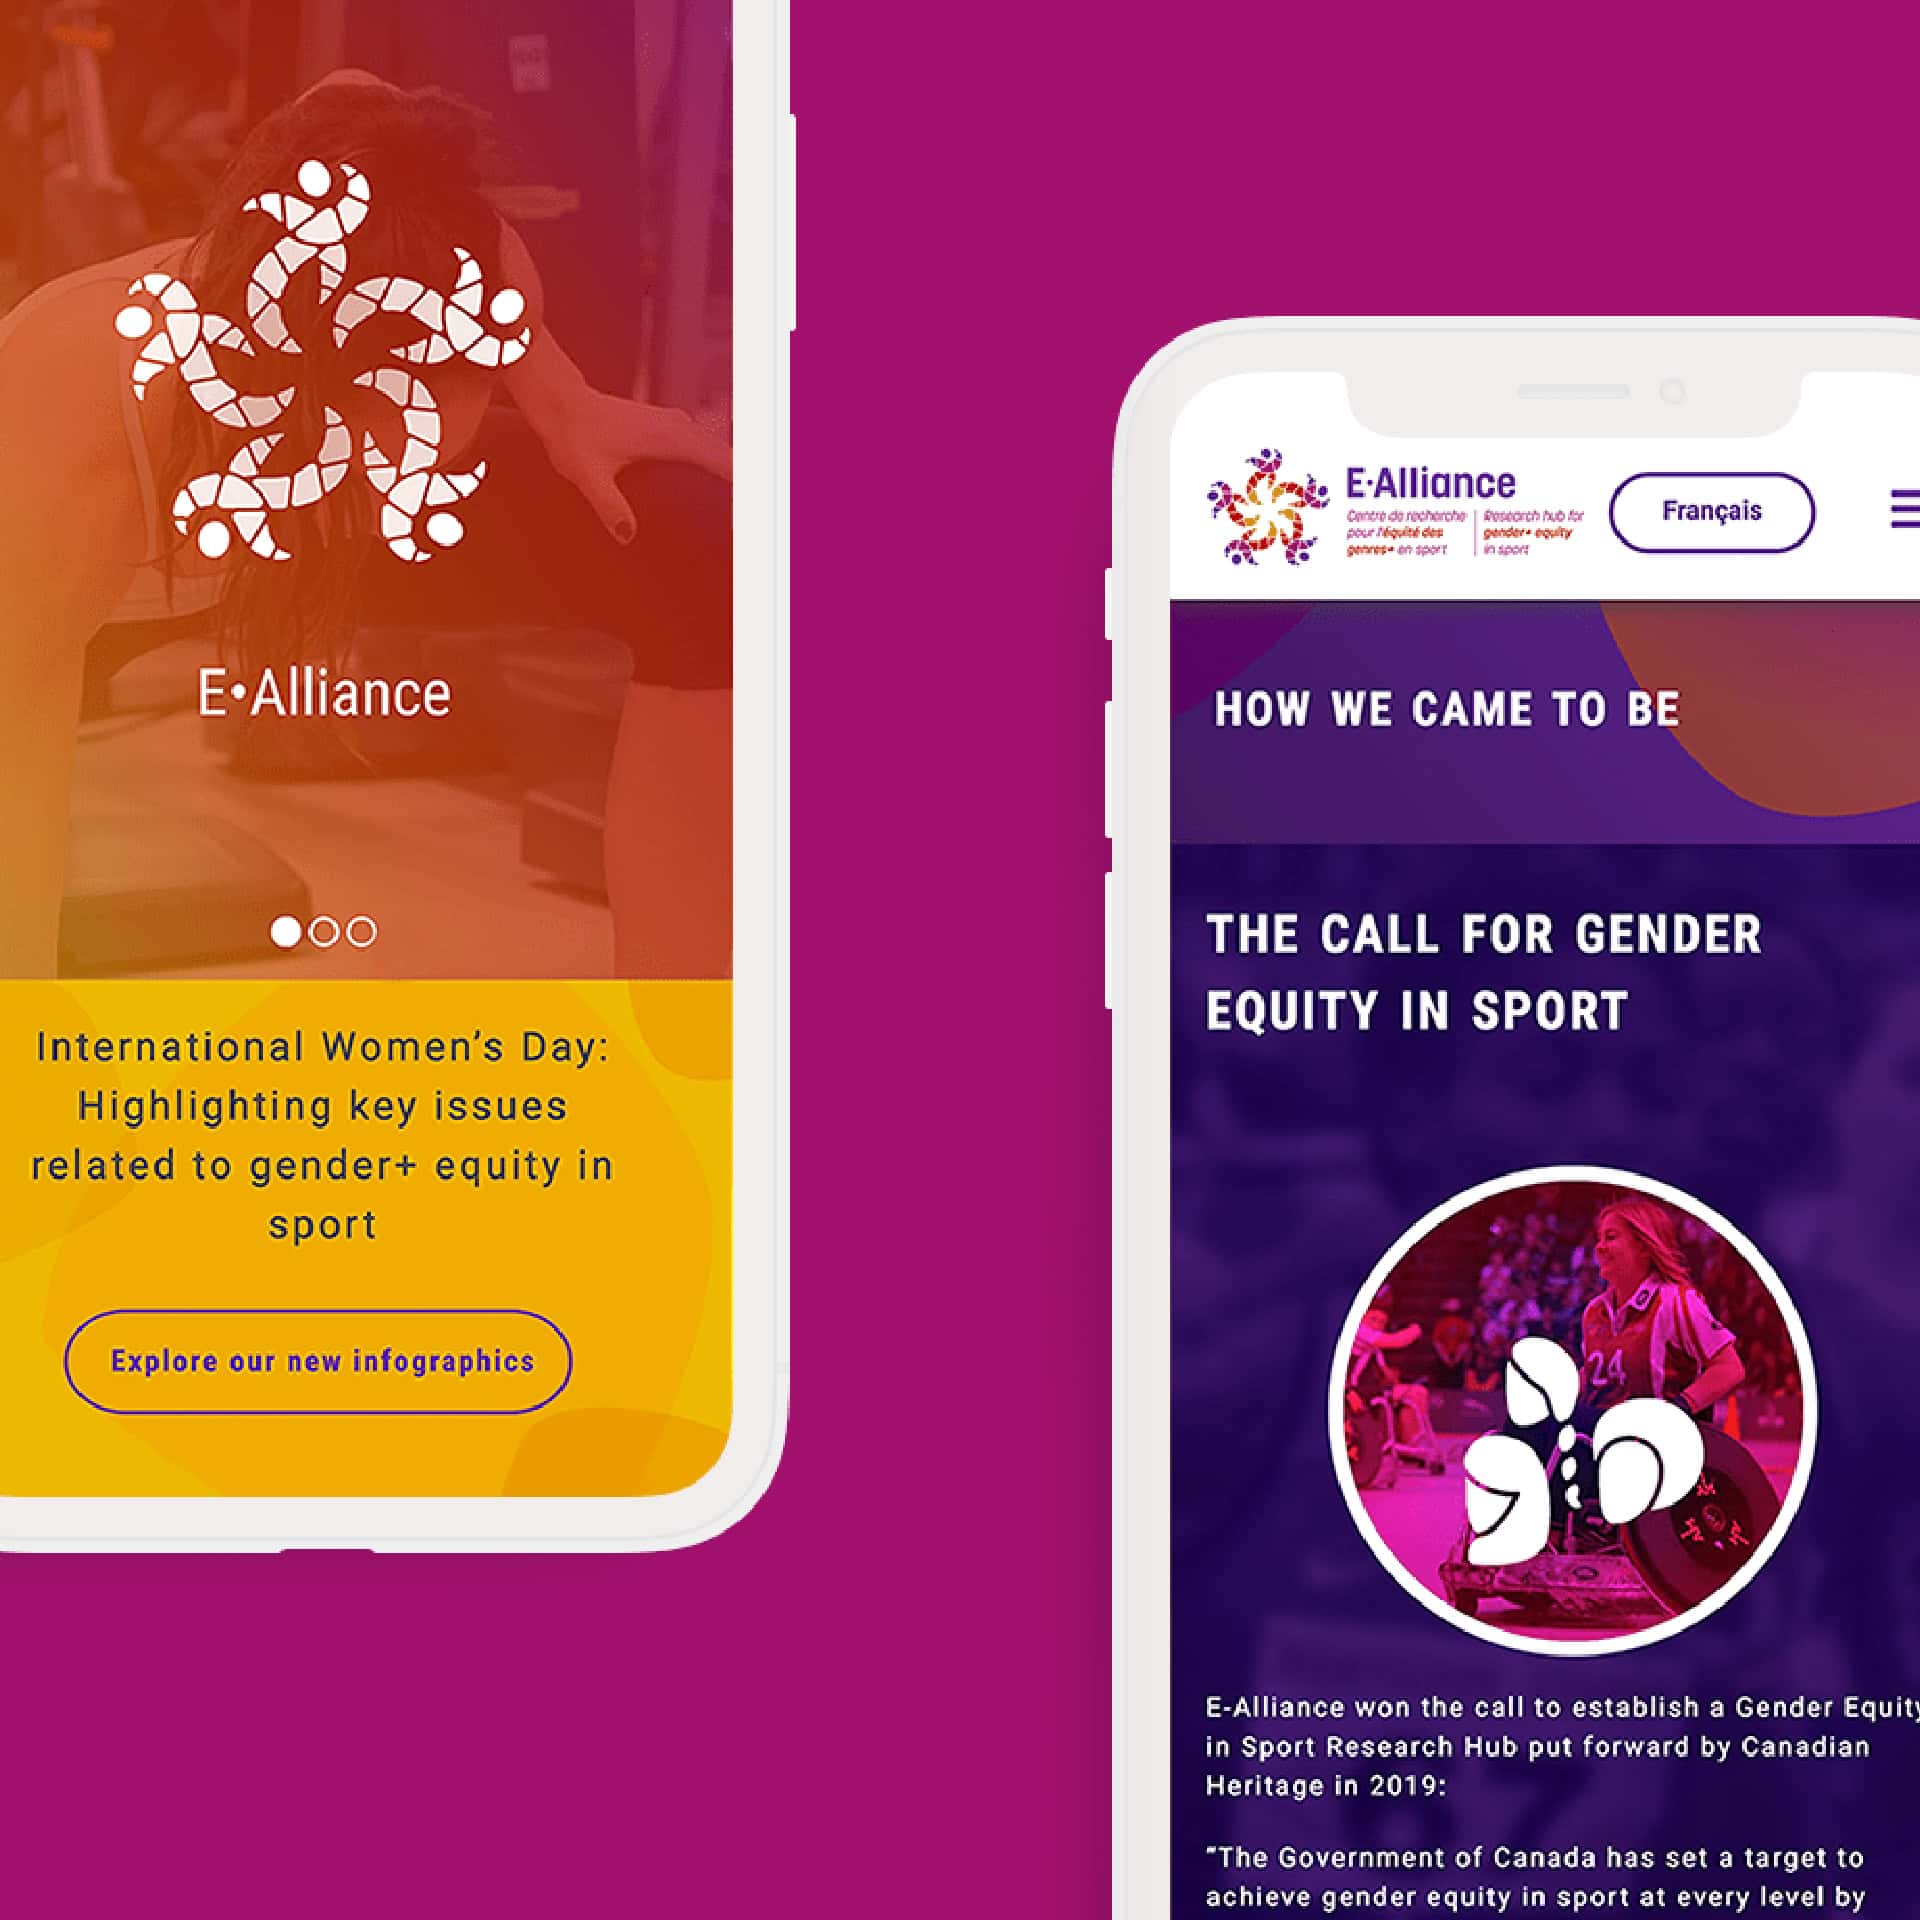 An i-phone mockup of the E-Alliance website. The site features the E-Alliance logo in white on a carousel, and the yellow section below it is a blurb about International Women's Day.